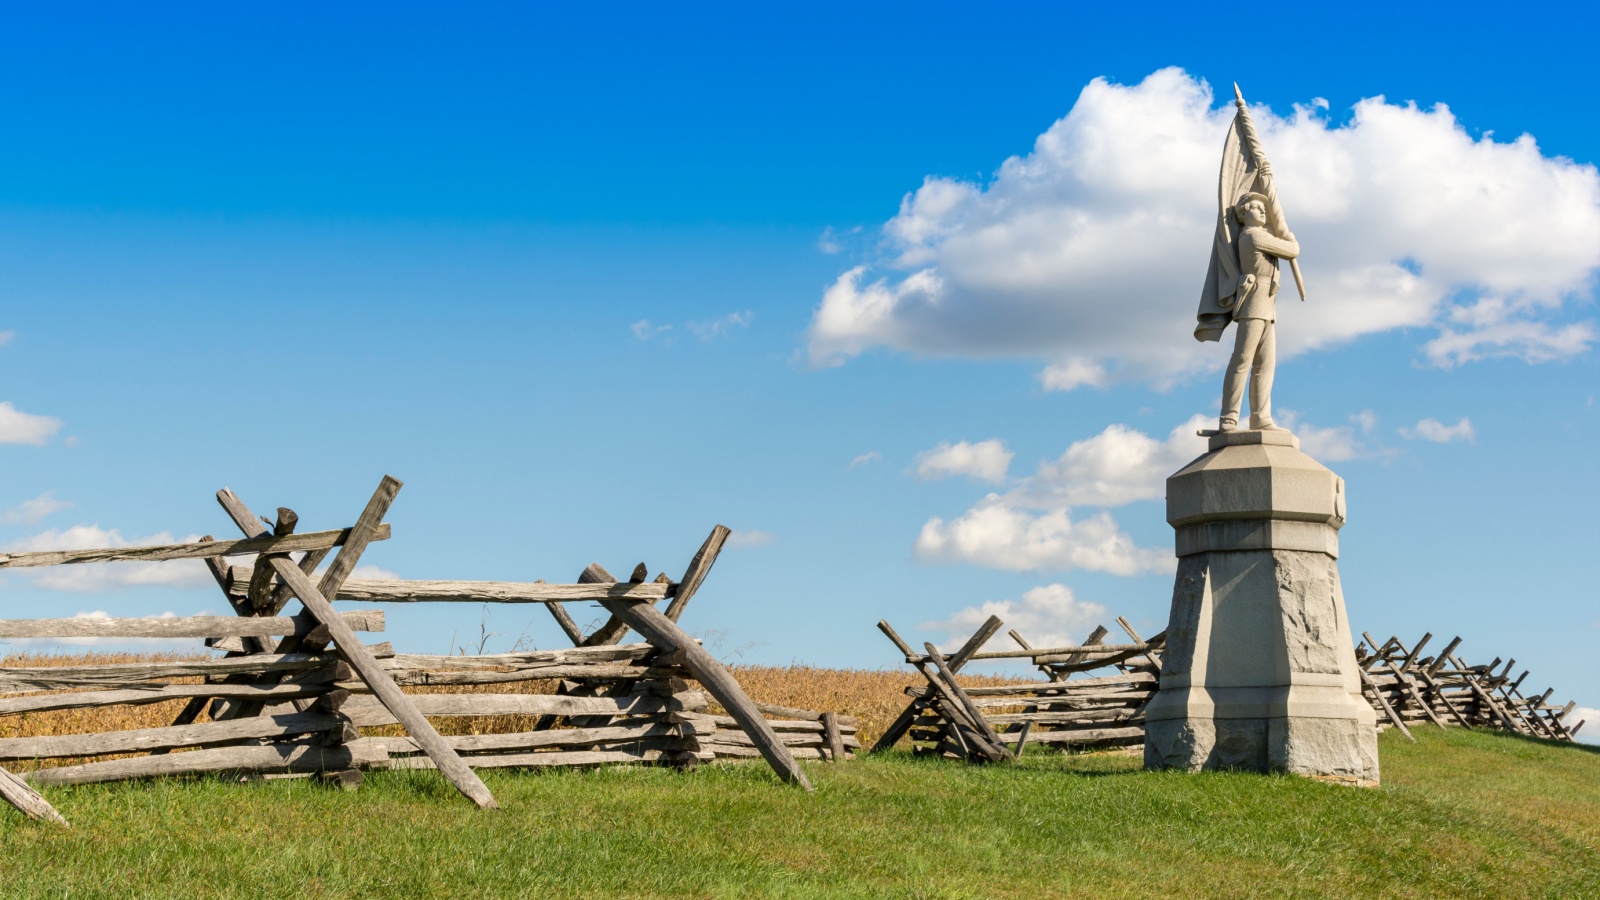 image credit: Gary Riegel/Shutterstock <p>Antietam was the backdrop for the bloodiest single-day battle in American history, with over 23,000 soldiers killed, wounded, or missing. Now a national park, the site offers a reflective experience with well-preserved landscapes and informative visitor centers. Each year, the park commemorates the battle with ceremonies and historical talks that attract history enthusiasts from around the globe.</p>